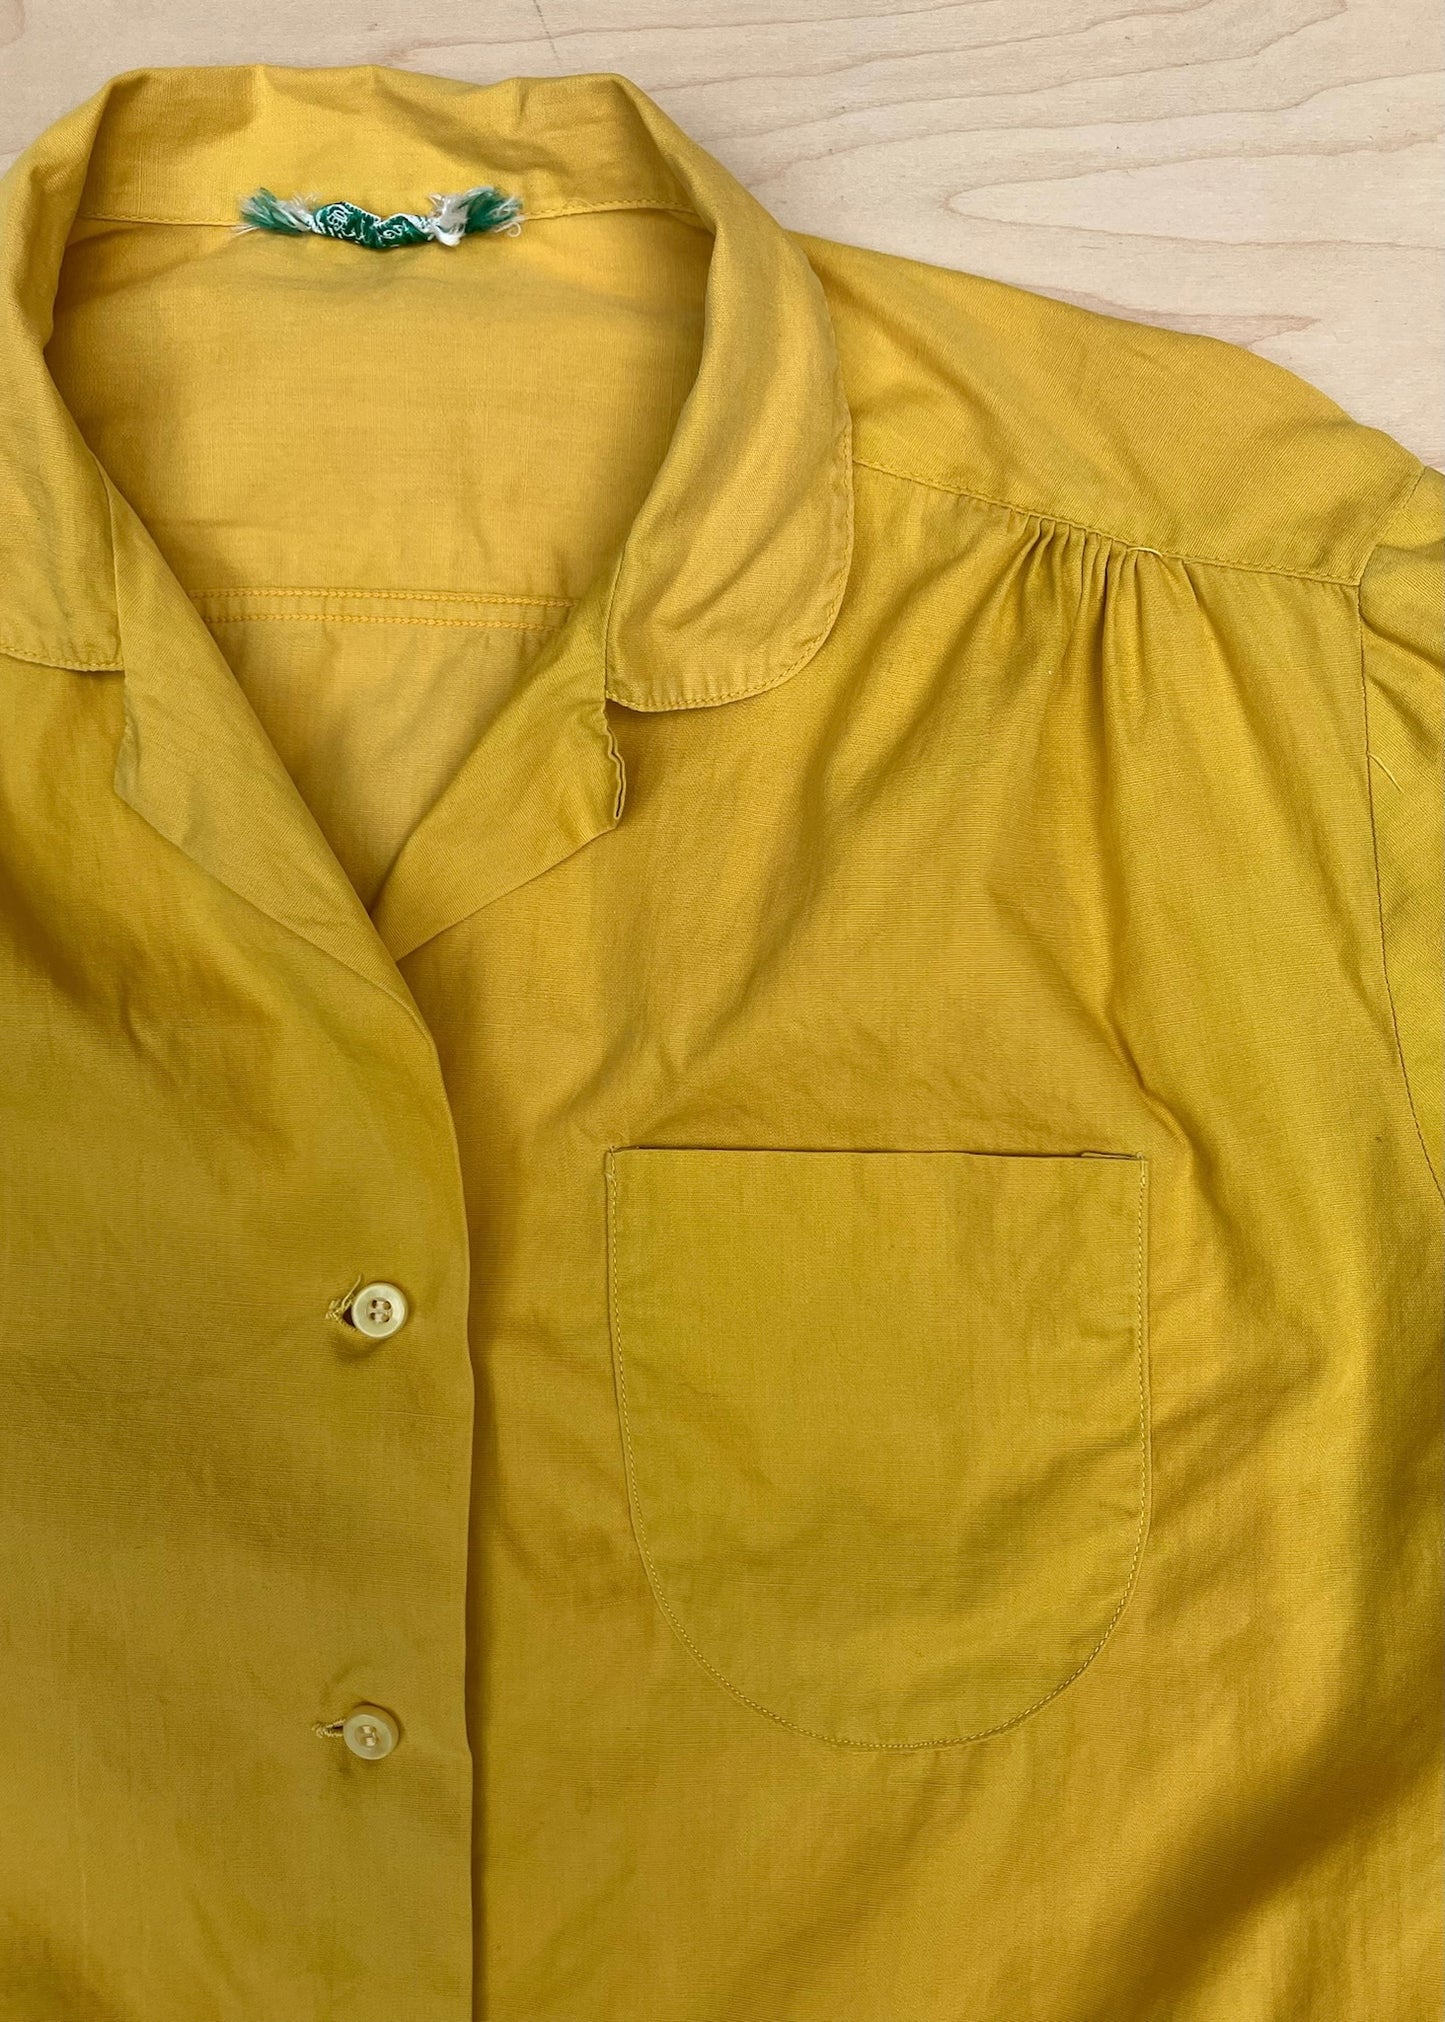 1950s YELLOW COLLARED BUTTONDOWN BLOUSE